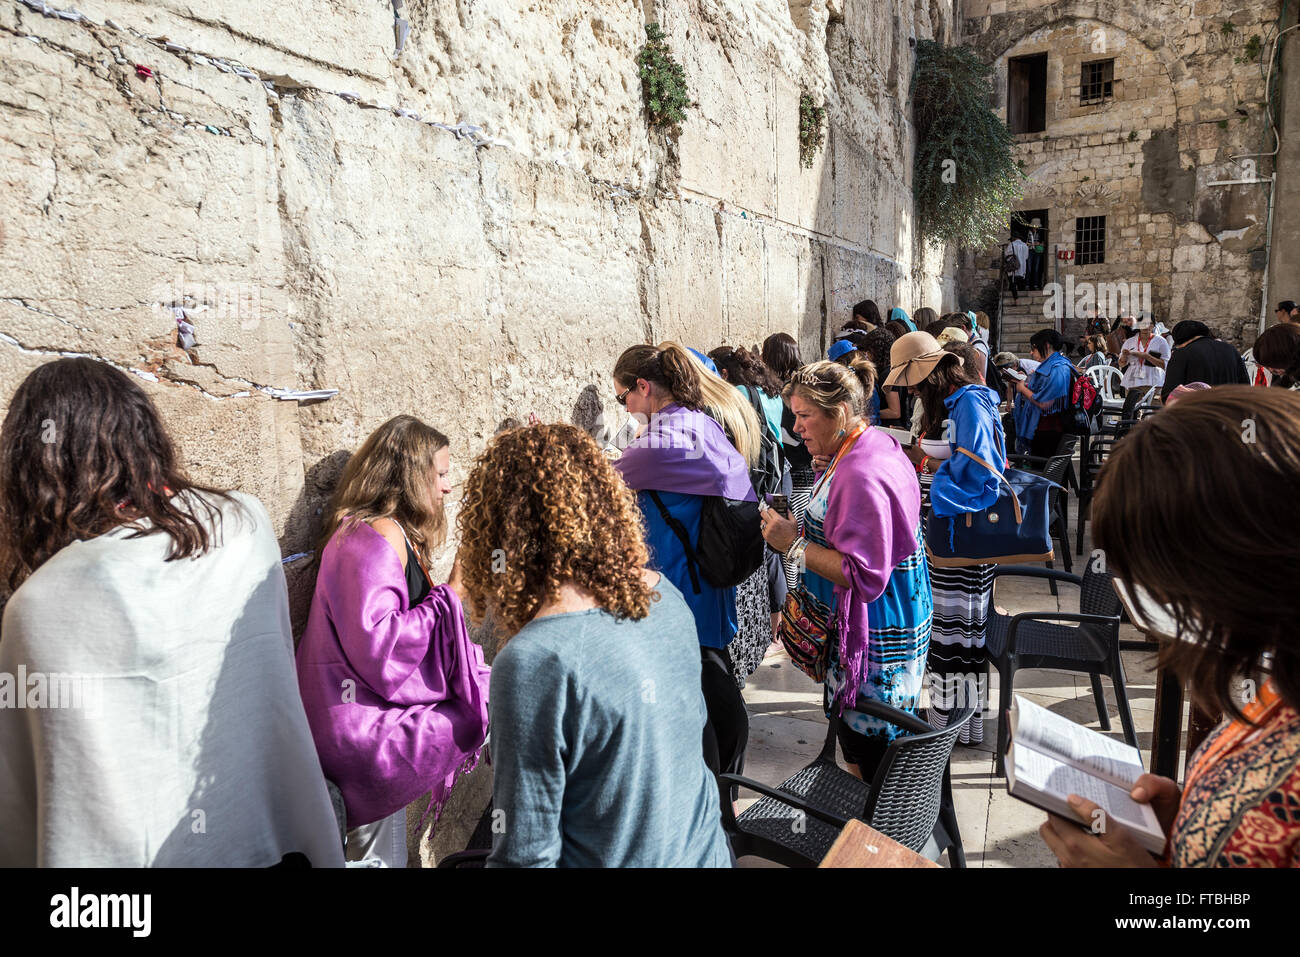 Women Praying At Western Wall Also Called Kotel Or Wailing Wall In